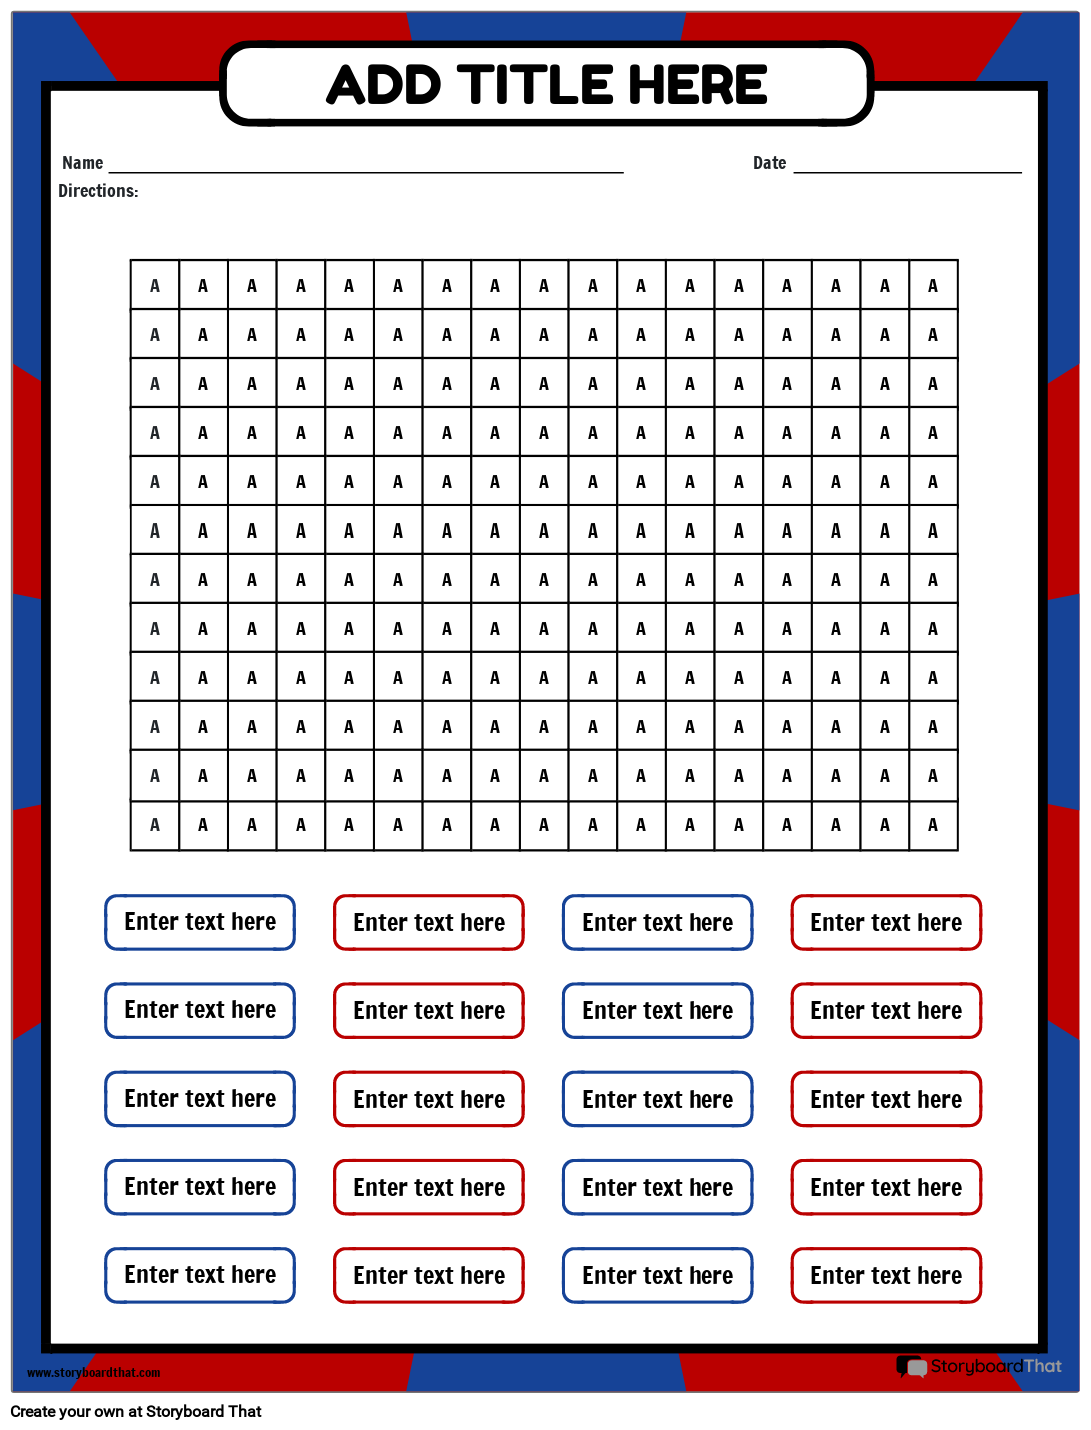 juneteenth-word-search-worksheet-storyboard-by-templates